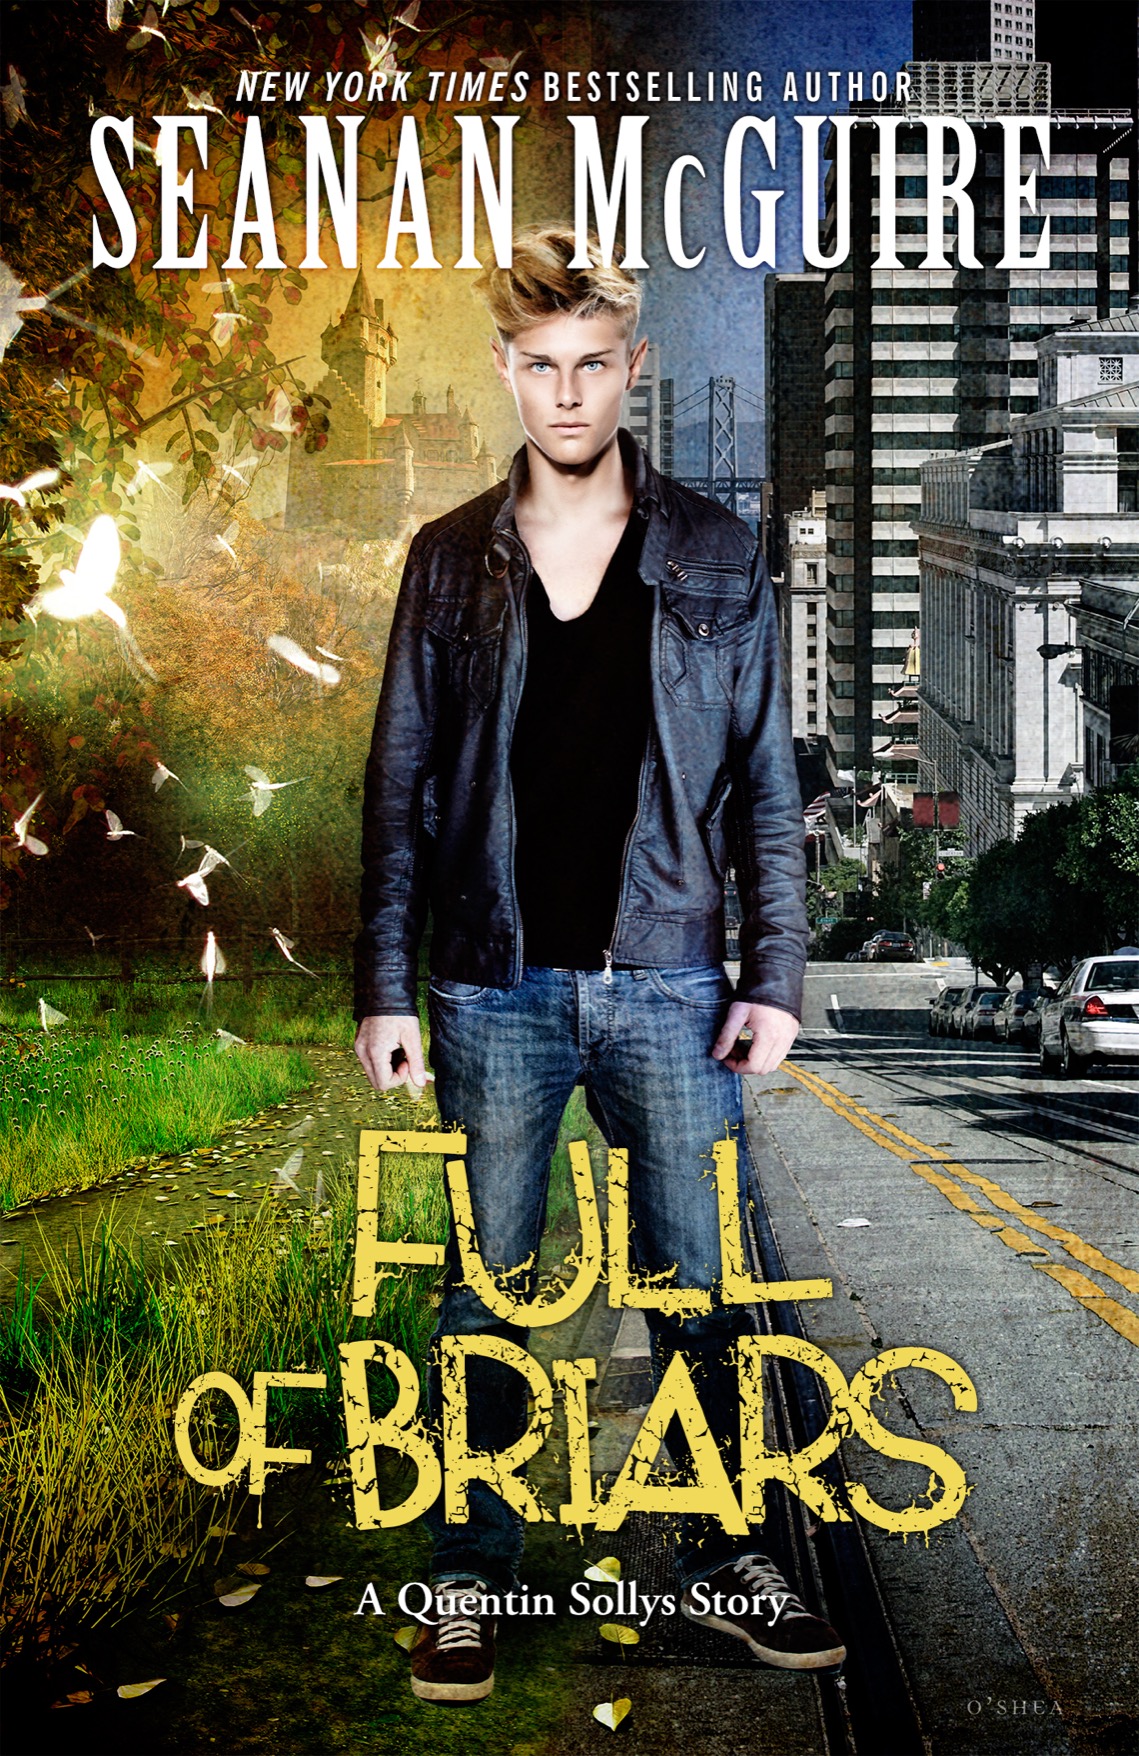 Full of Briars by Seanan McGuire